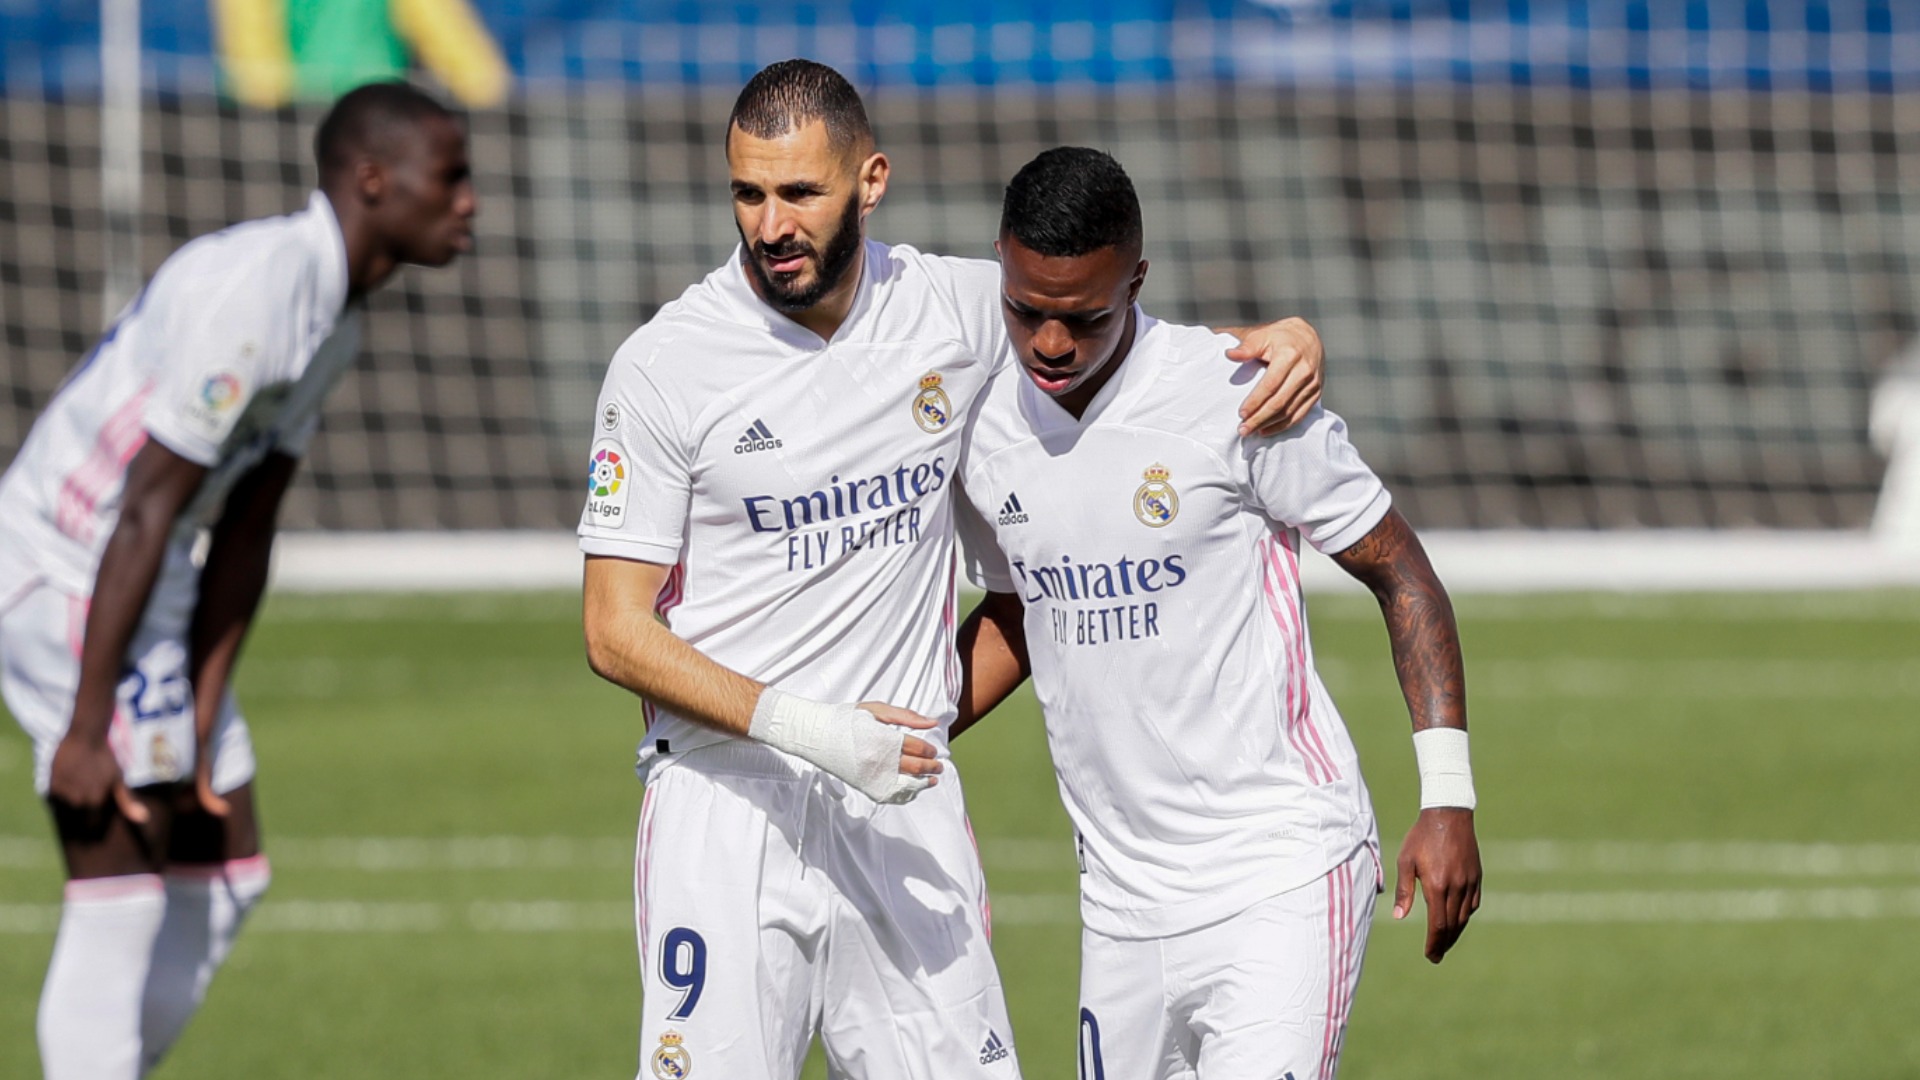 Karim Benzema's suggestion to ignore Vinicius Junior was not as extraordinary as claimed, says Zinedine Zidane, with such exchanges common.